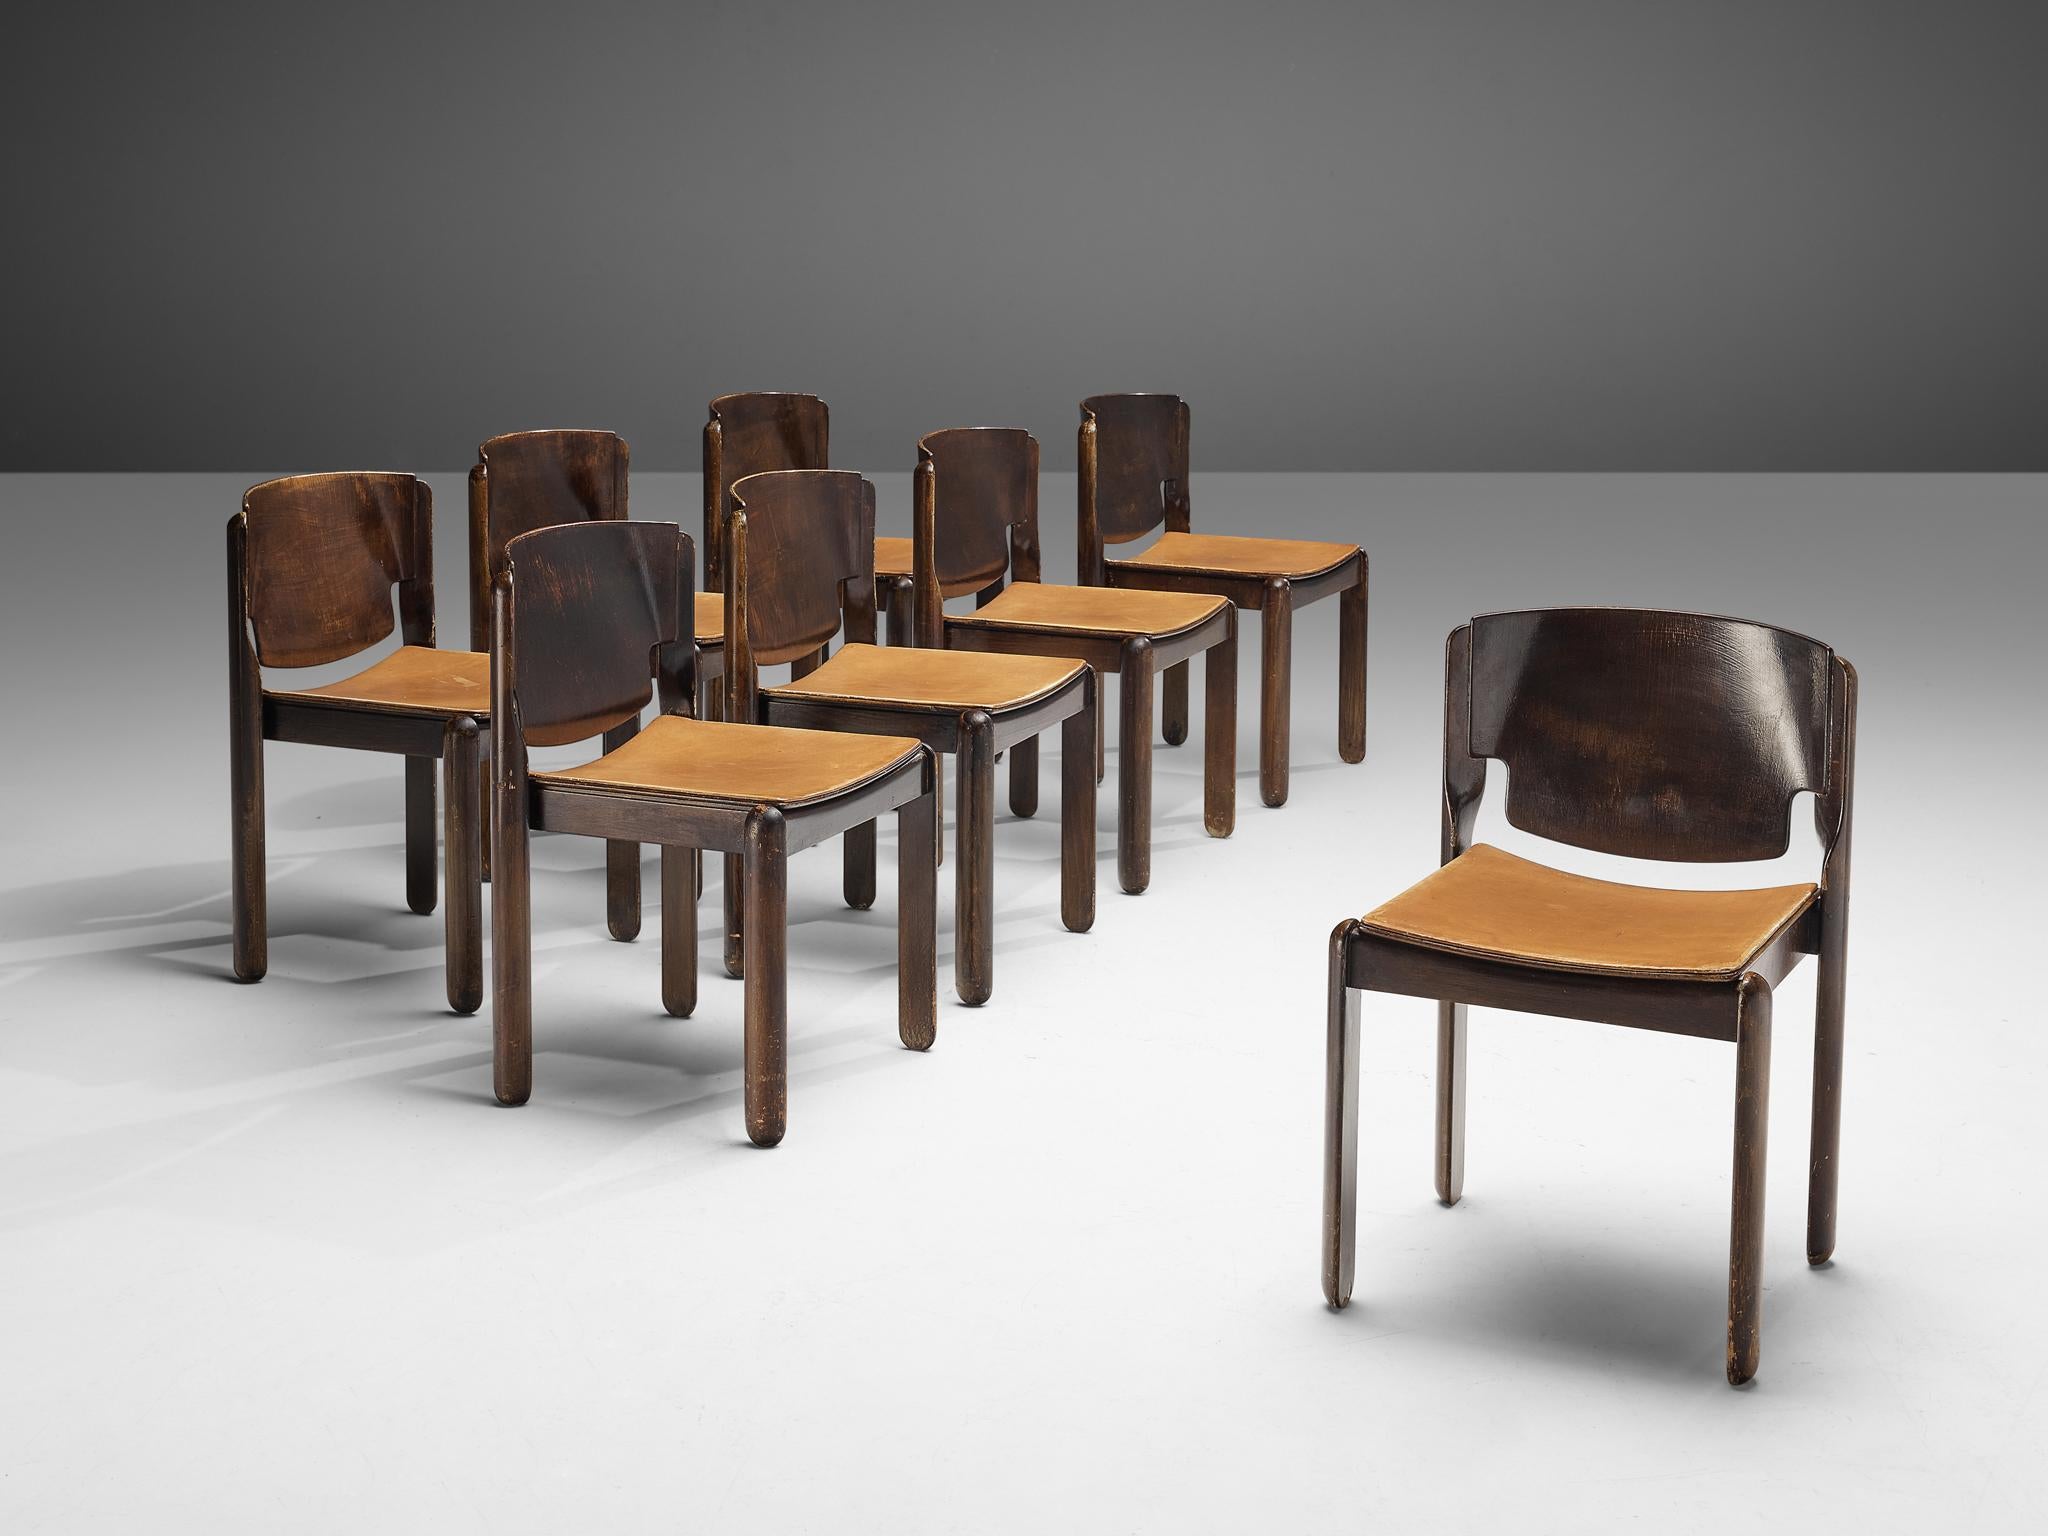 Vico Magistretti for Cassina, set of eight chairs, model '122', curved plywood, beech, Italy, 1967

Sculpted set of eight dining chairs, designed by Vico Magistretti. The patinated wooden chairs feature half cylindrical legs, that are rounded at